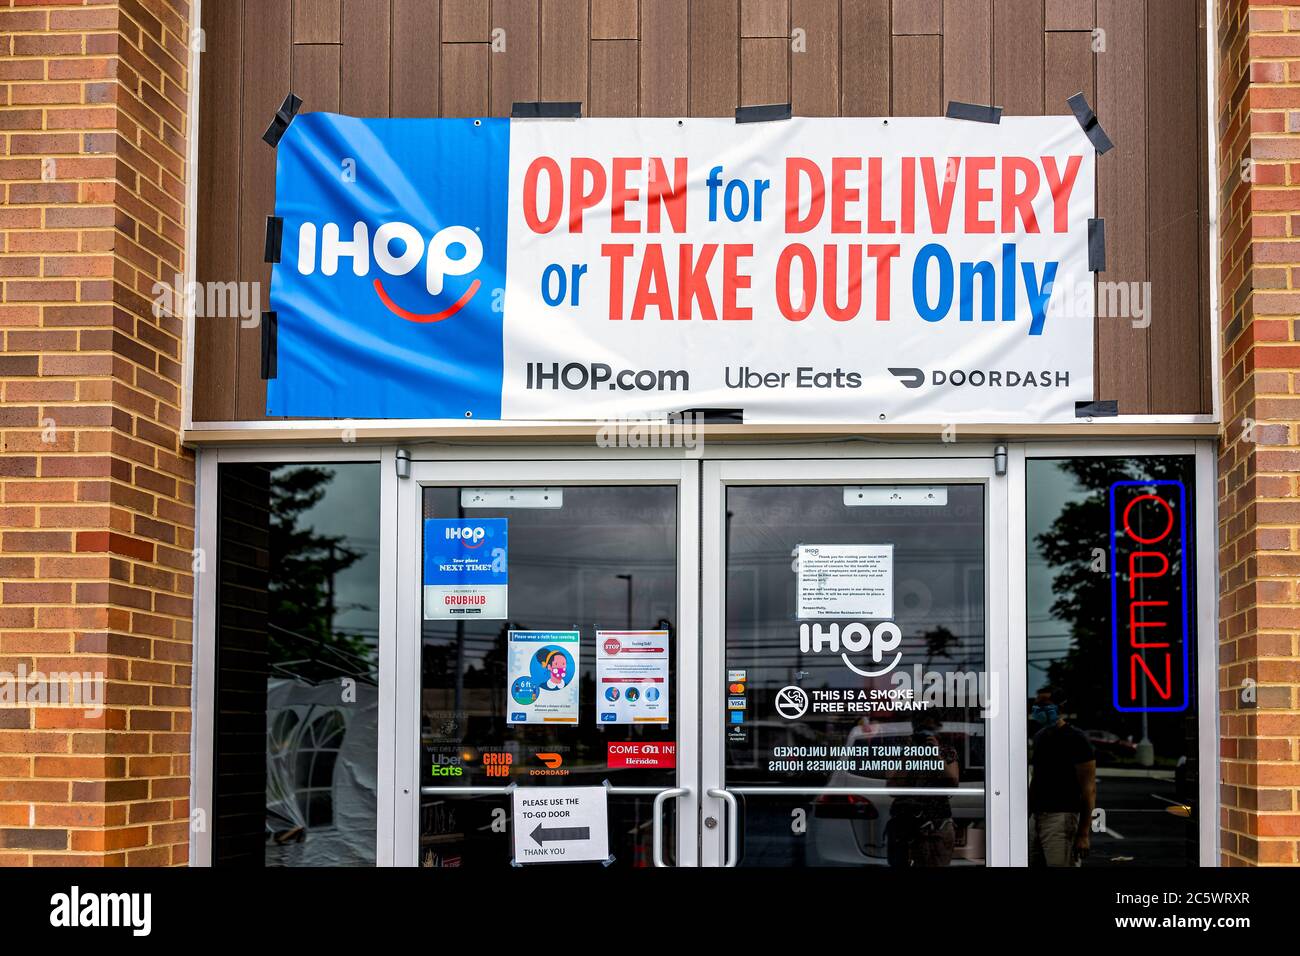 Herndon, USA - June 11, 2020: Virginia Fairfax County building entrance sign for open ihop restaurant for take-out and delivery during coronavirus Stock Photo